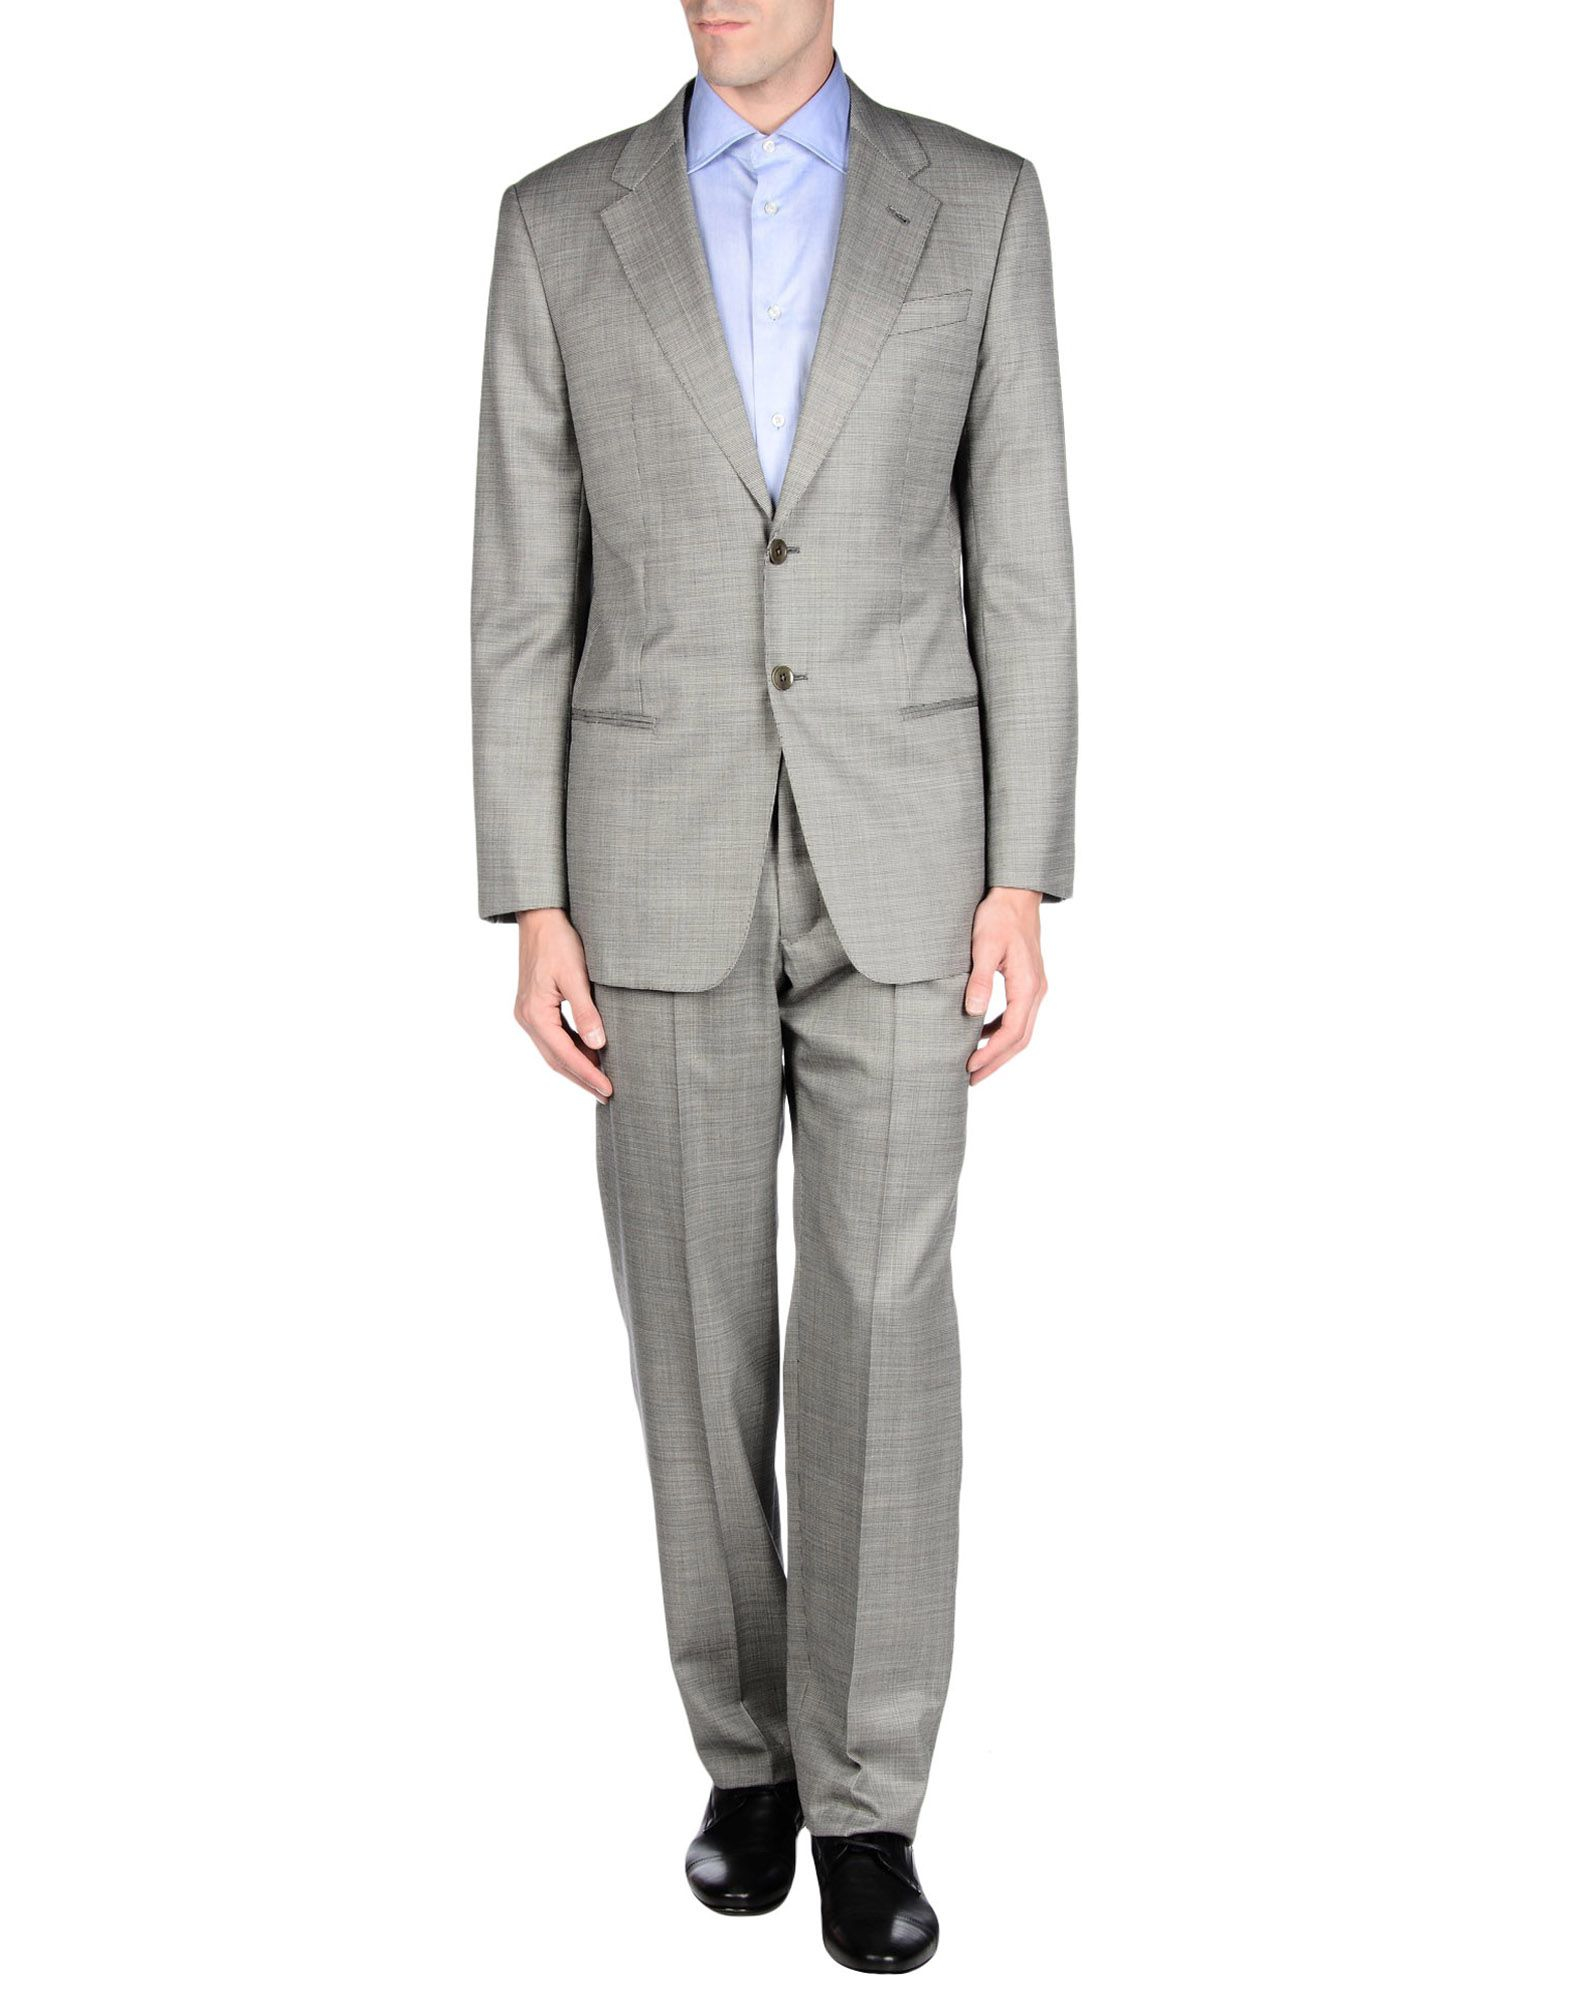 Lyst - Armani Suit in Gray for Men